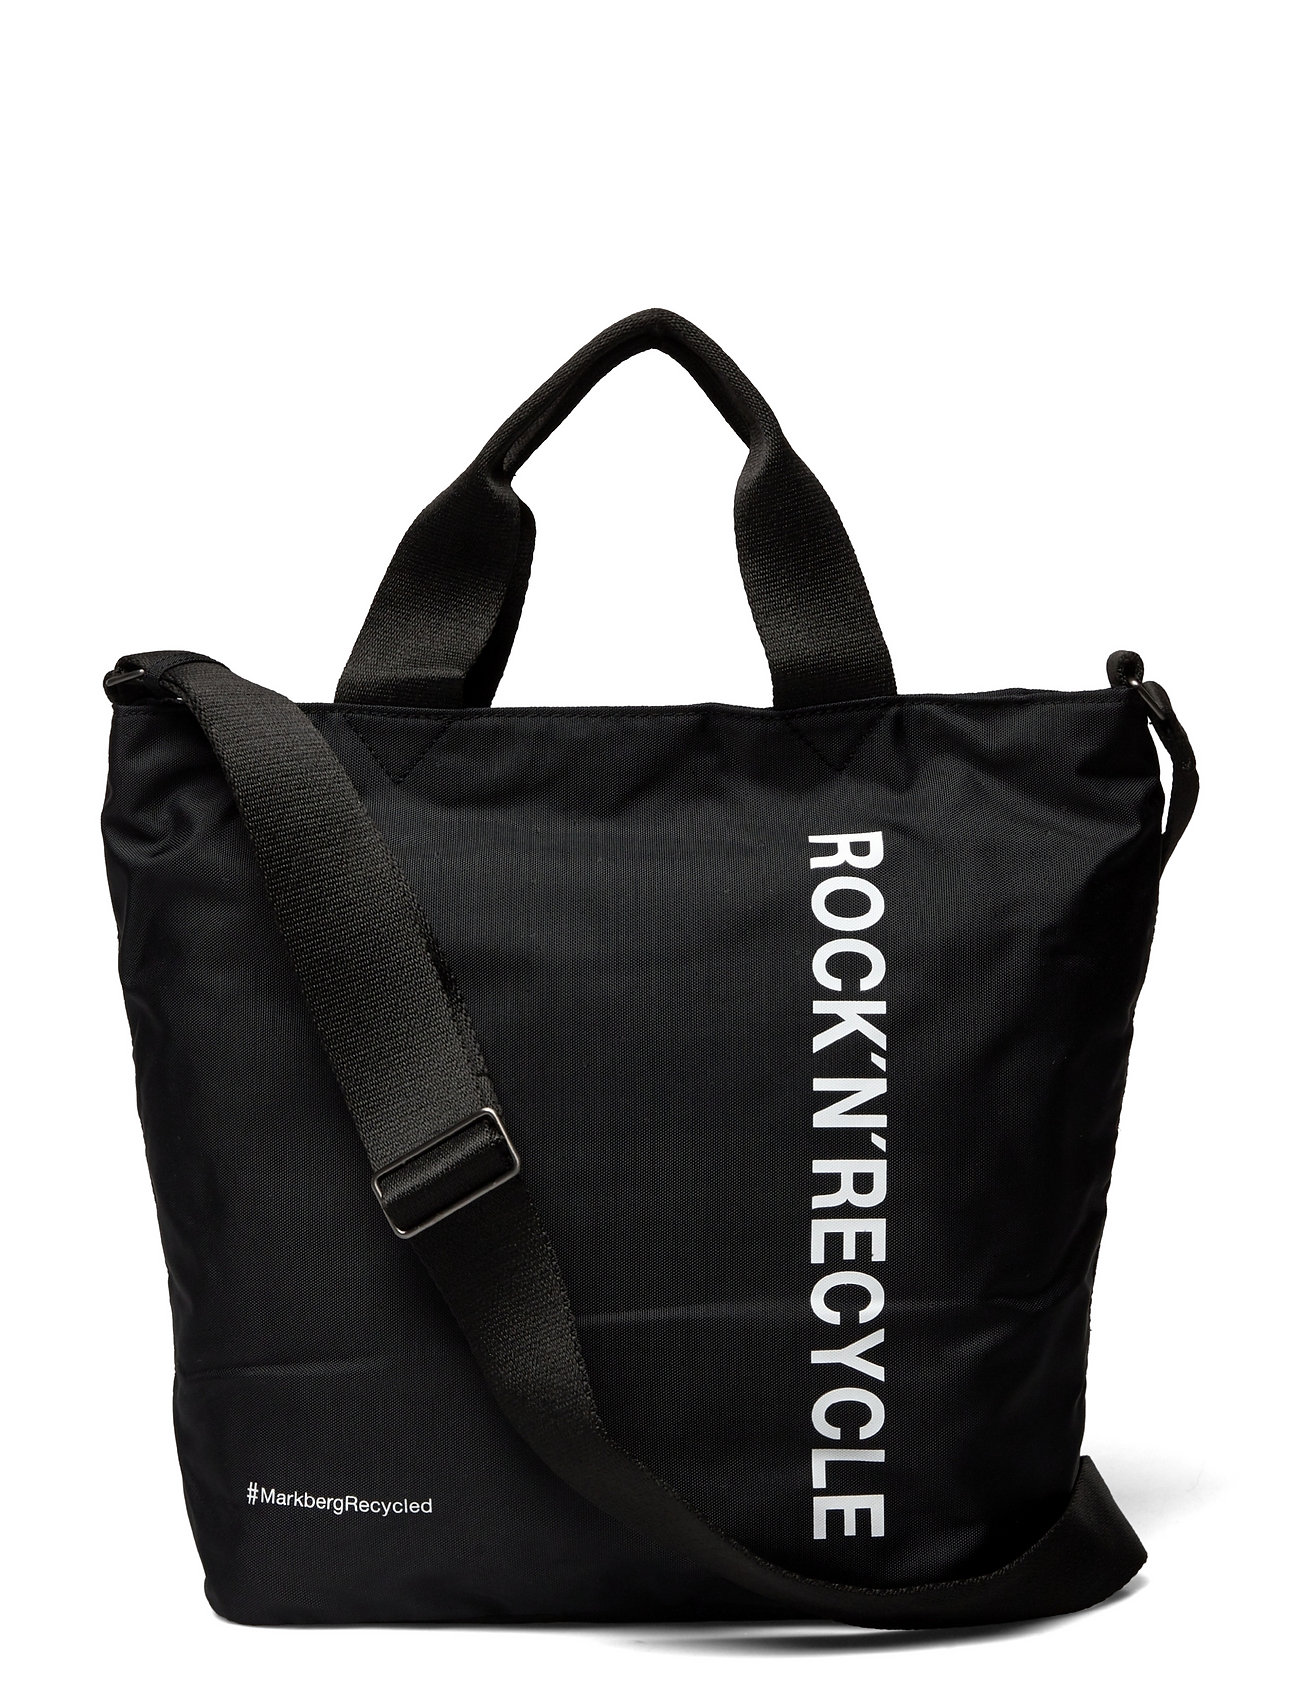 Markberg Isabella Shopper, Recycled - Shoppers & Tote Bags - Boozt.com